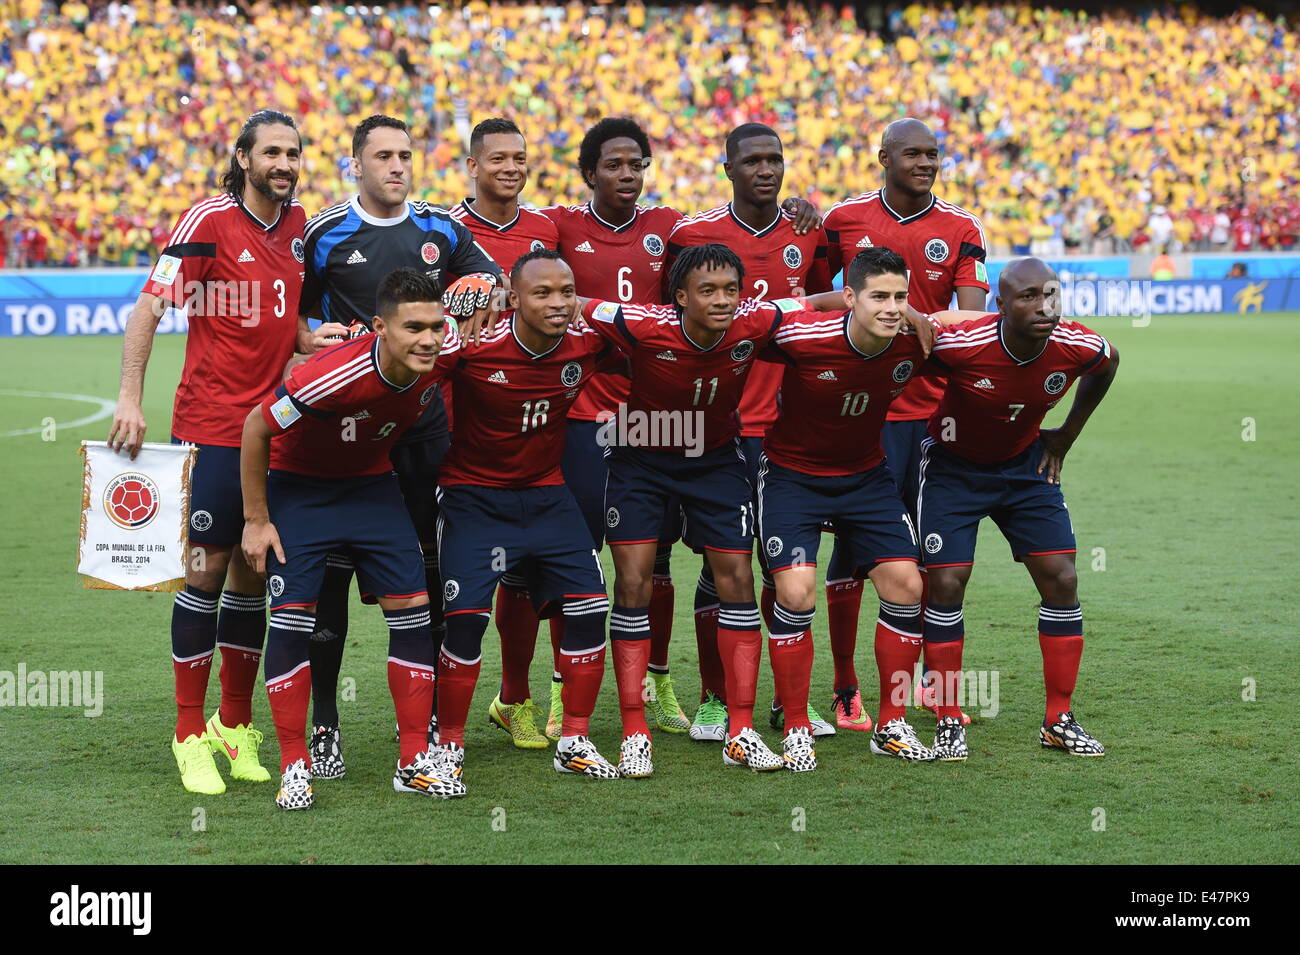 Fortaleza, Brazil. 04th July, 2014. Colombia's starting eleven (top L-R) Mario Yepes, goalkeeper David Ospina, Fredy Guarin, Carlos Sanchez, Pablo Armero, Victor Ibarbo, (bottom L-R) Teofilo Teo Gutierrez, Juan Zuniga, Juan Cuadrado, James Rodriguez, and Cristian Zapata pose for the group photo prior to the FIFA World Cup 2014 quarter final match soccer between Brazil and Colombia at the Estadio Castelao in Fortaleza, Brazil, 04 July 2014. Photo: Marius Becker/dpa/Alamy Live News Stock Photo